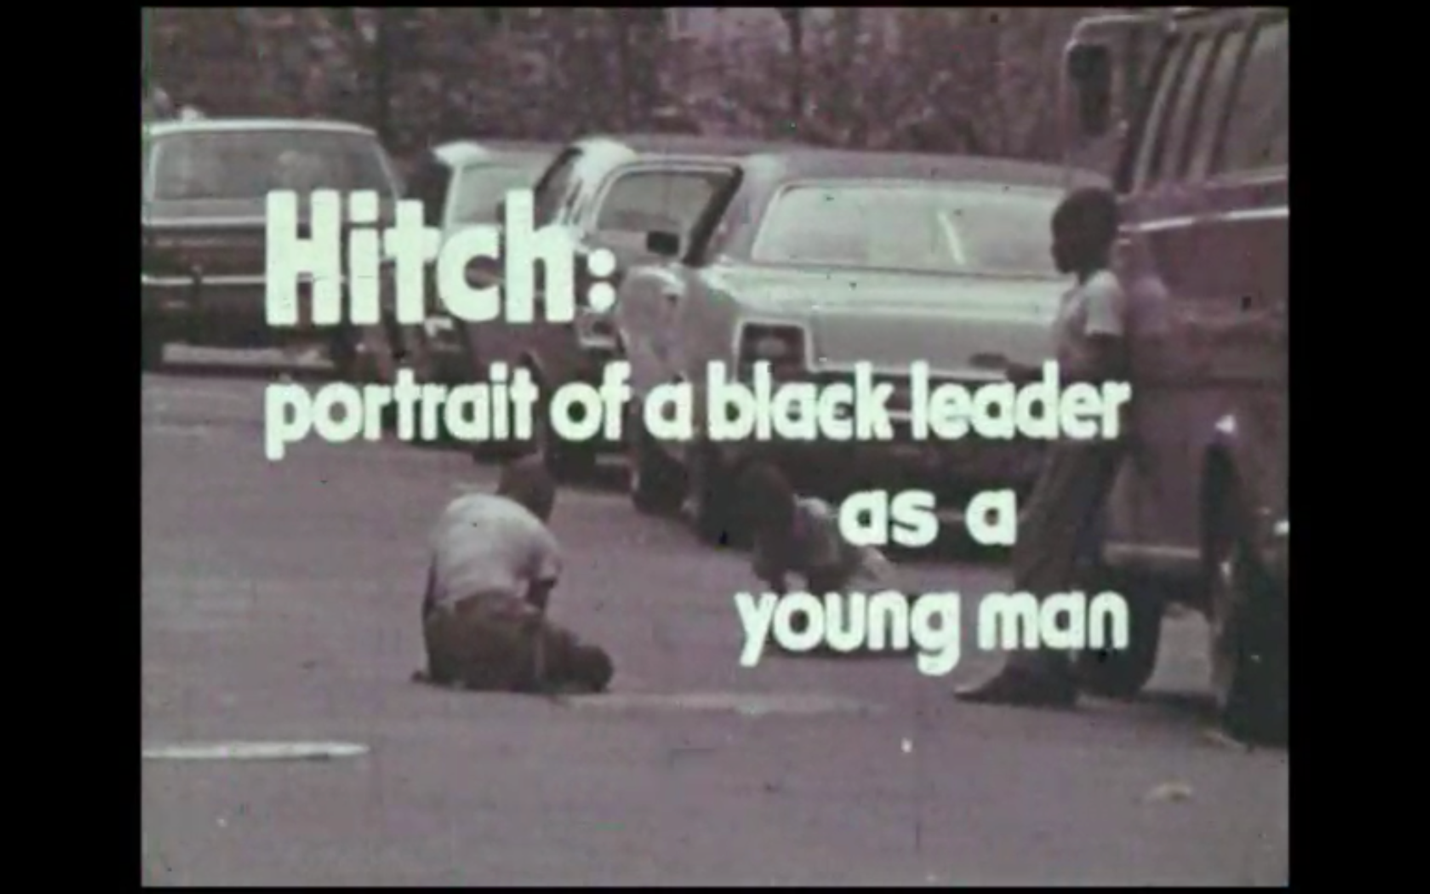 A still image of the title frame from <em>Hitch: Portrait of the Black Leader as a Young Man</em>. The title words appear in white font over an exterior scene of three young Black children playing on the macadam of a city street. A line of parked cars appears behind them and in the background. The children appear to be playing jacks or dice. The image is used with permission of Oren Jacoby.